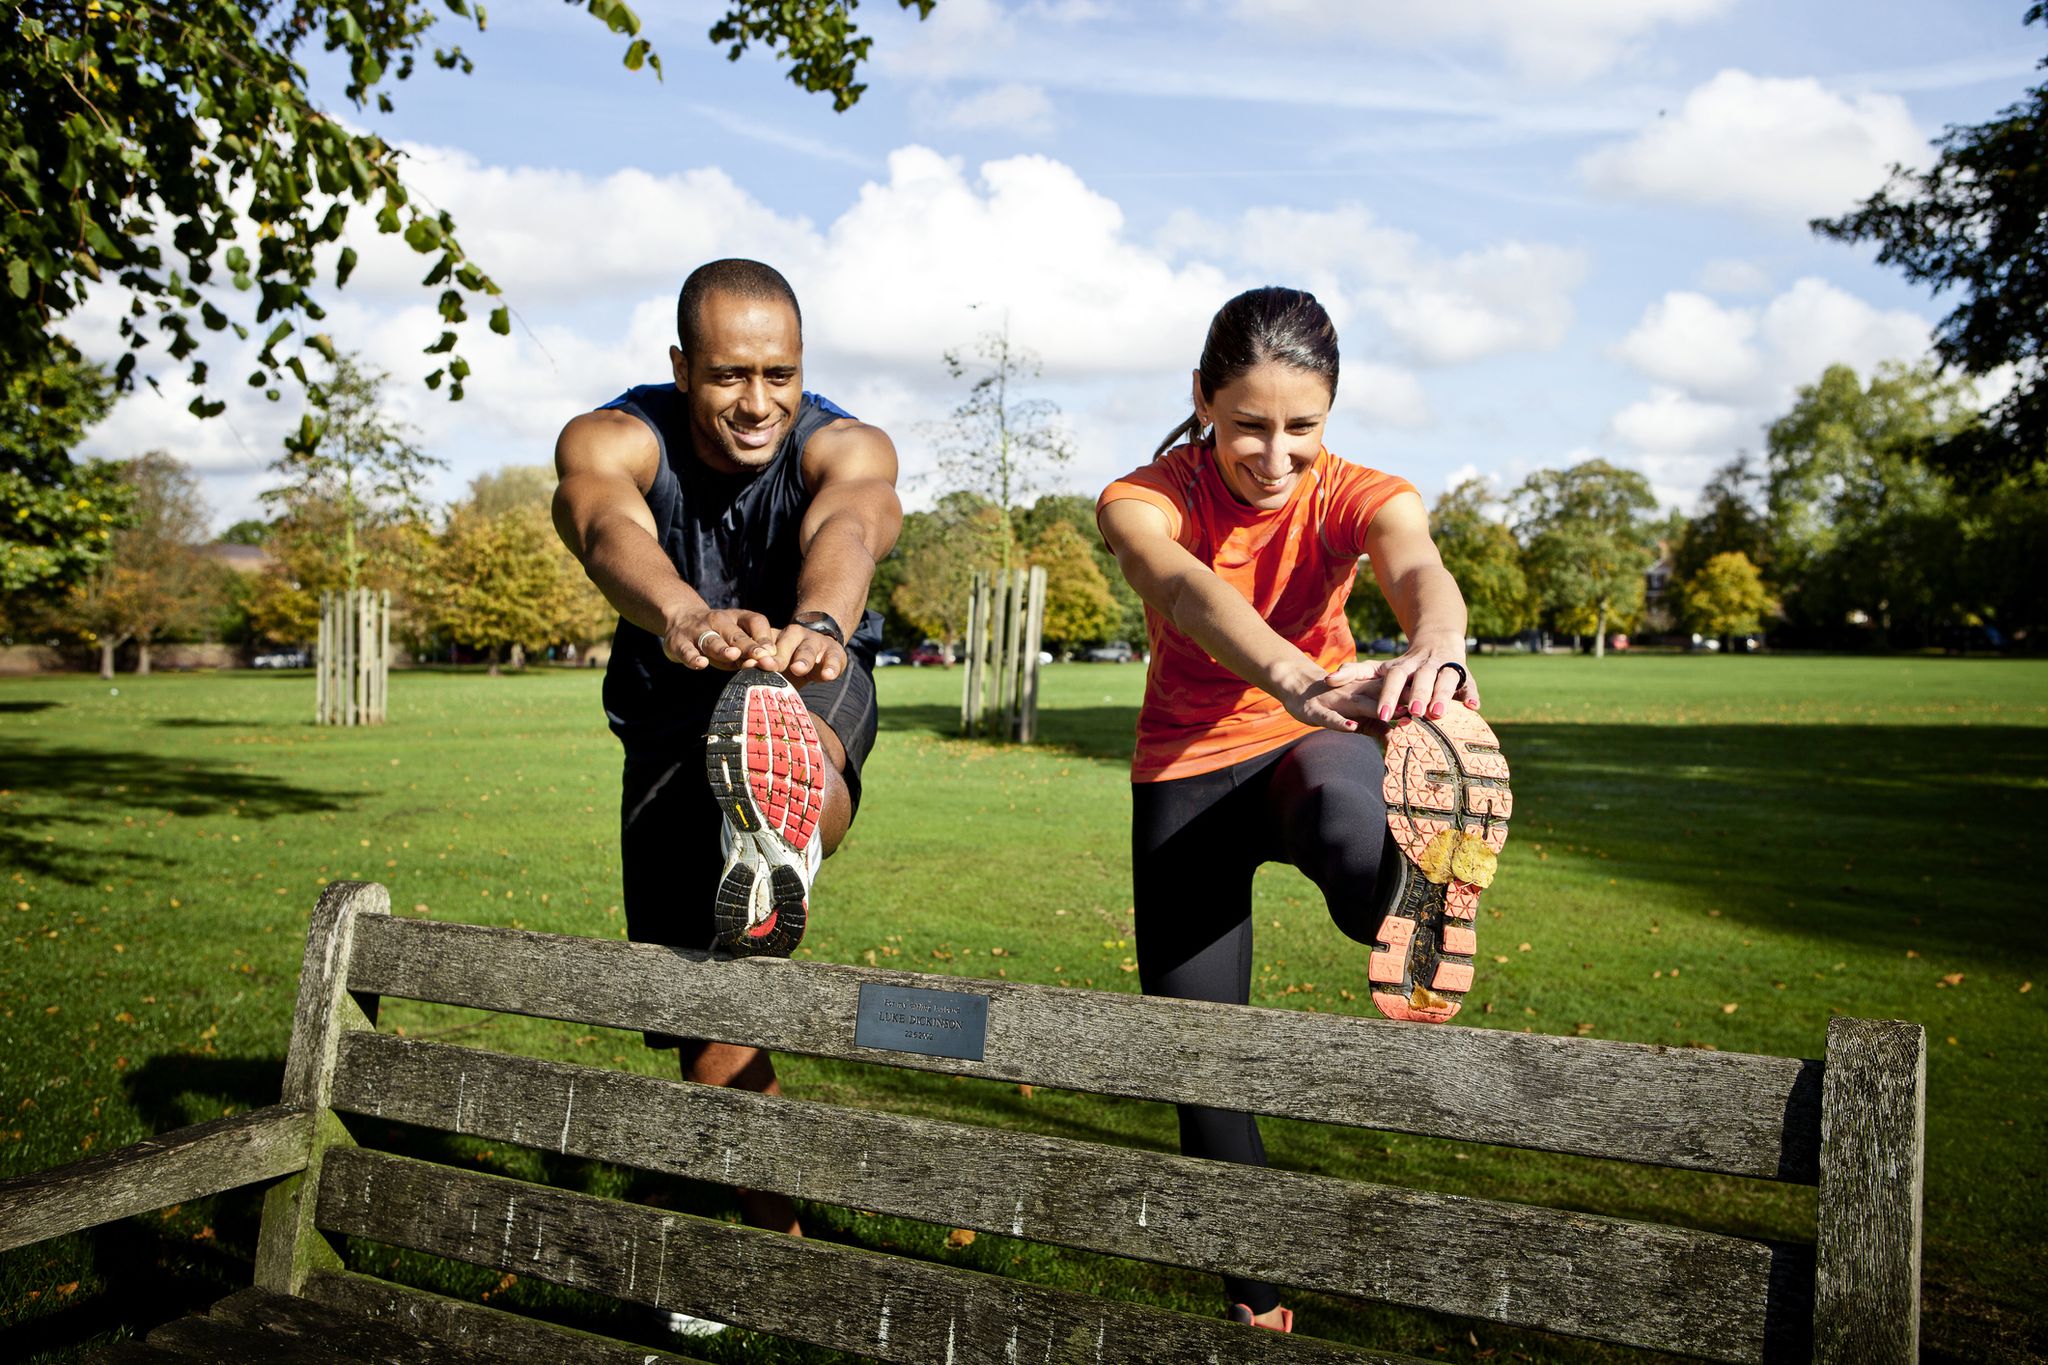 couple stretching legs on park bench